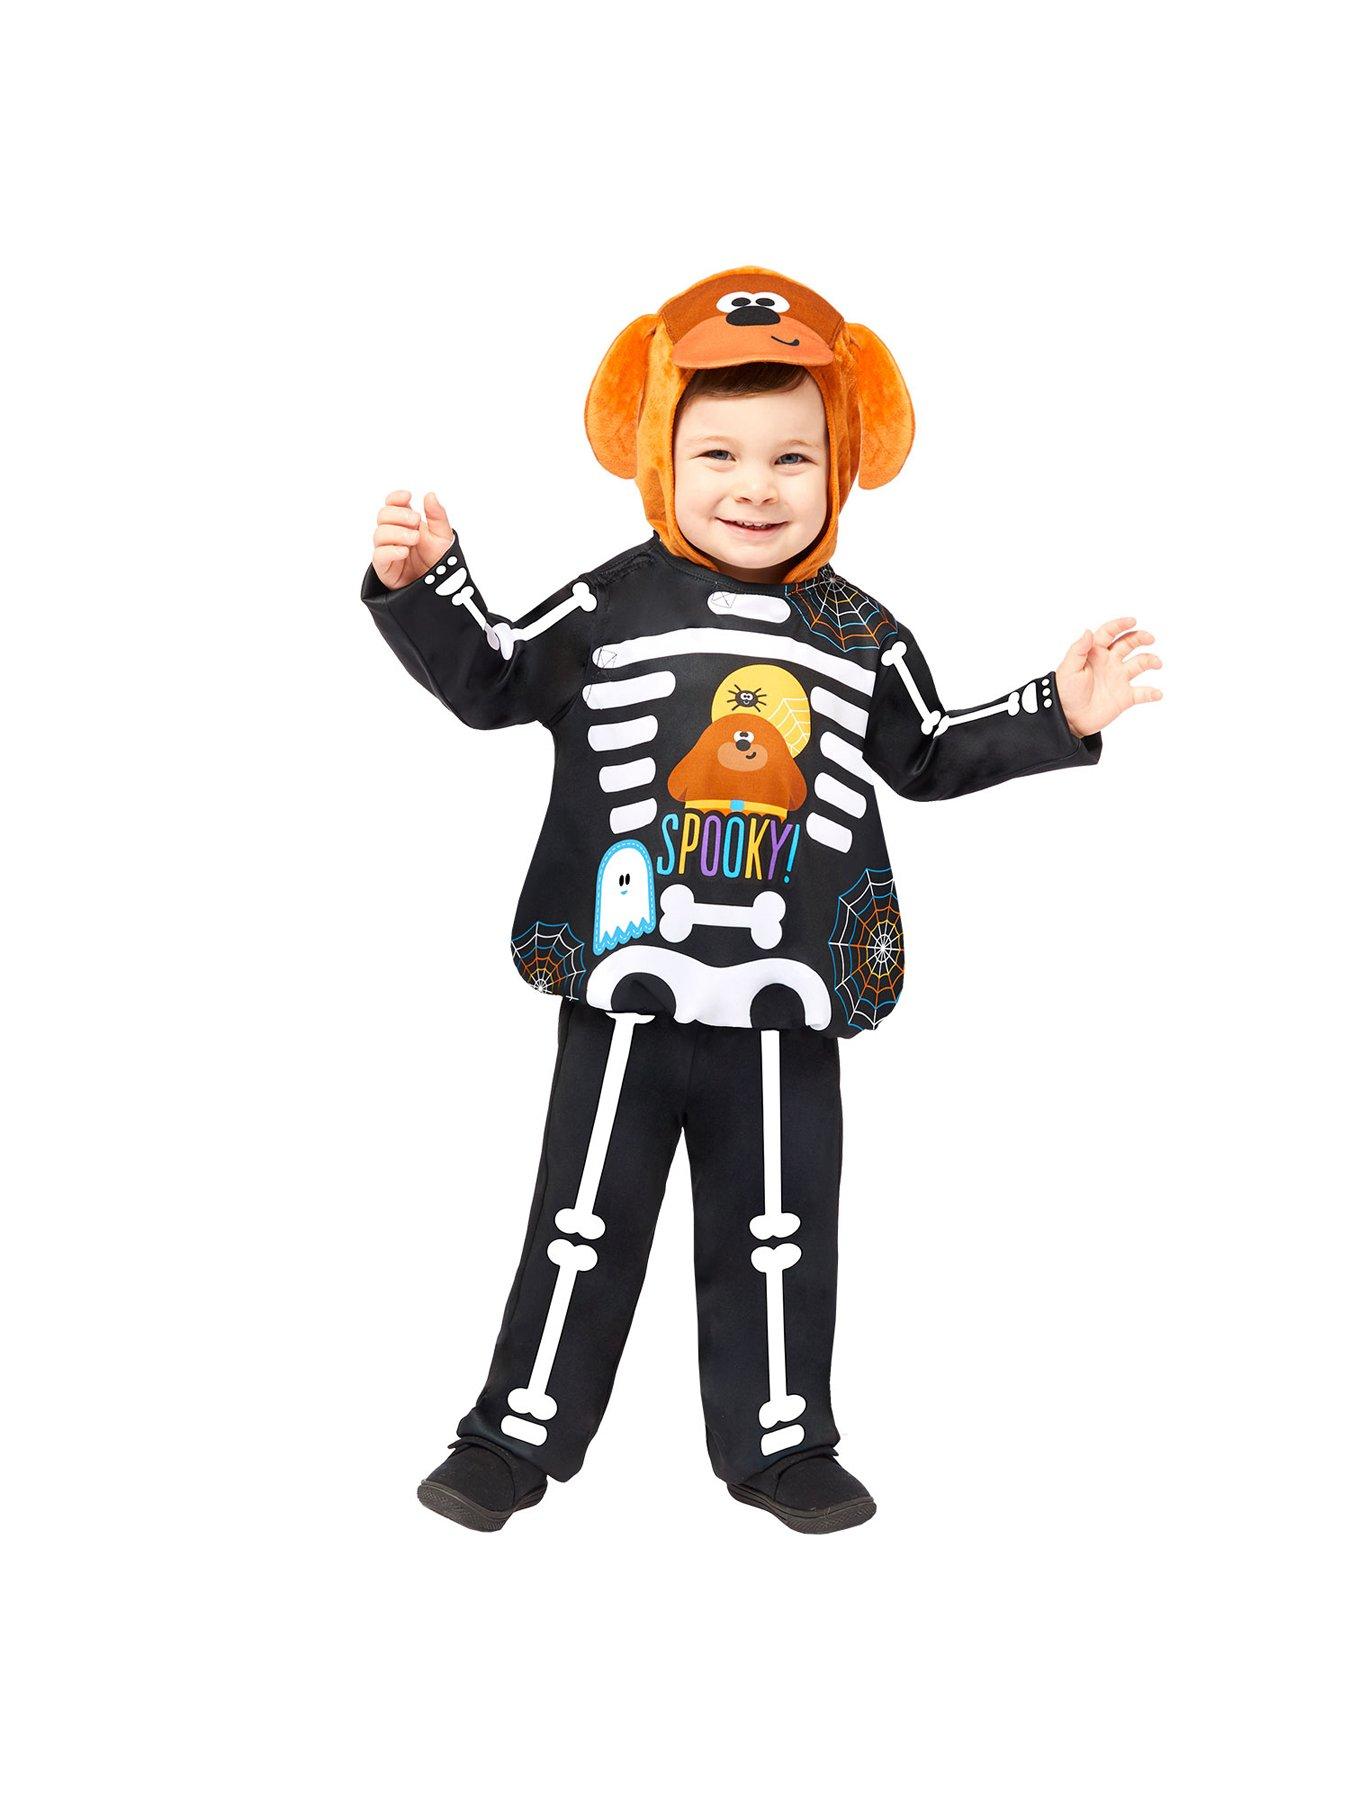 Halloween Costumes Kids Costumes Toddler Baby Variety 18-36 Months